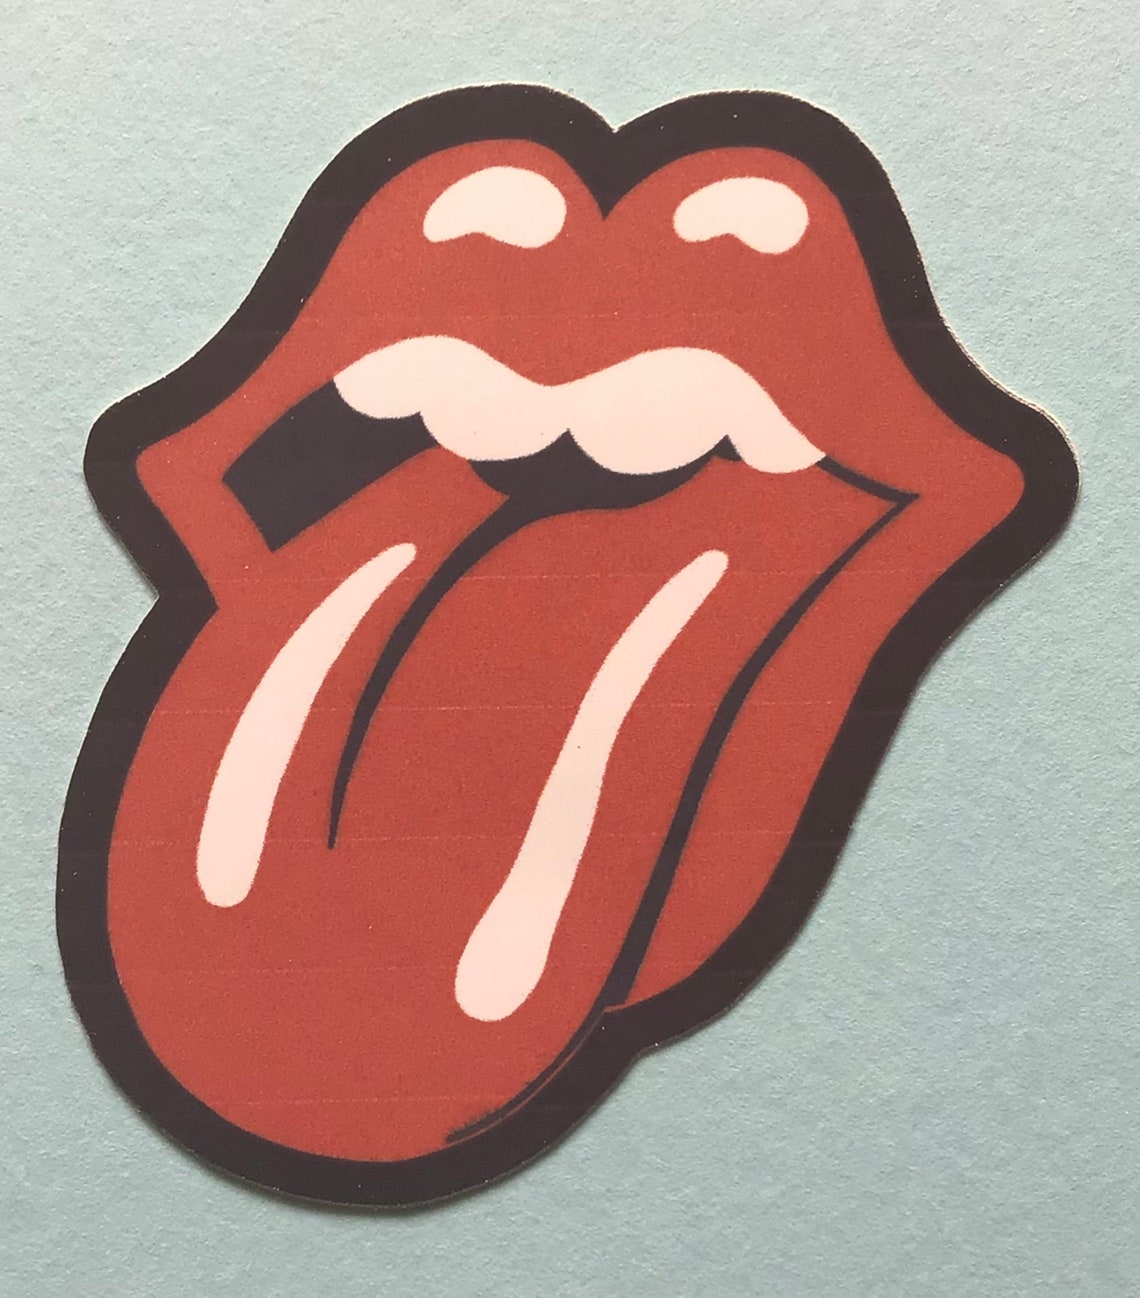 The Rolling Stones Logo With Black Background Sticker | Etsy